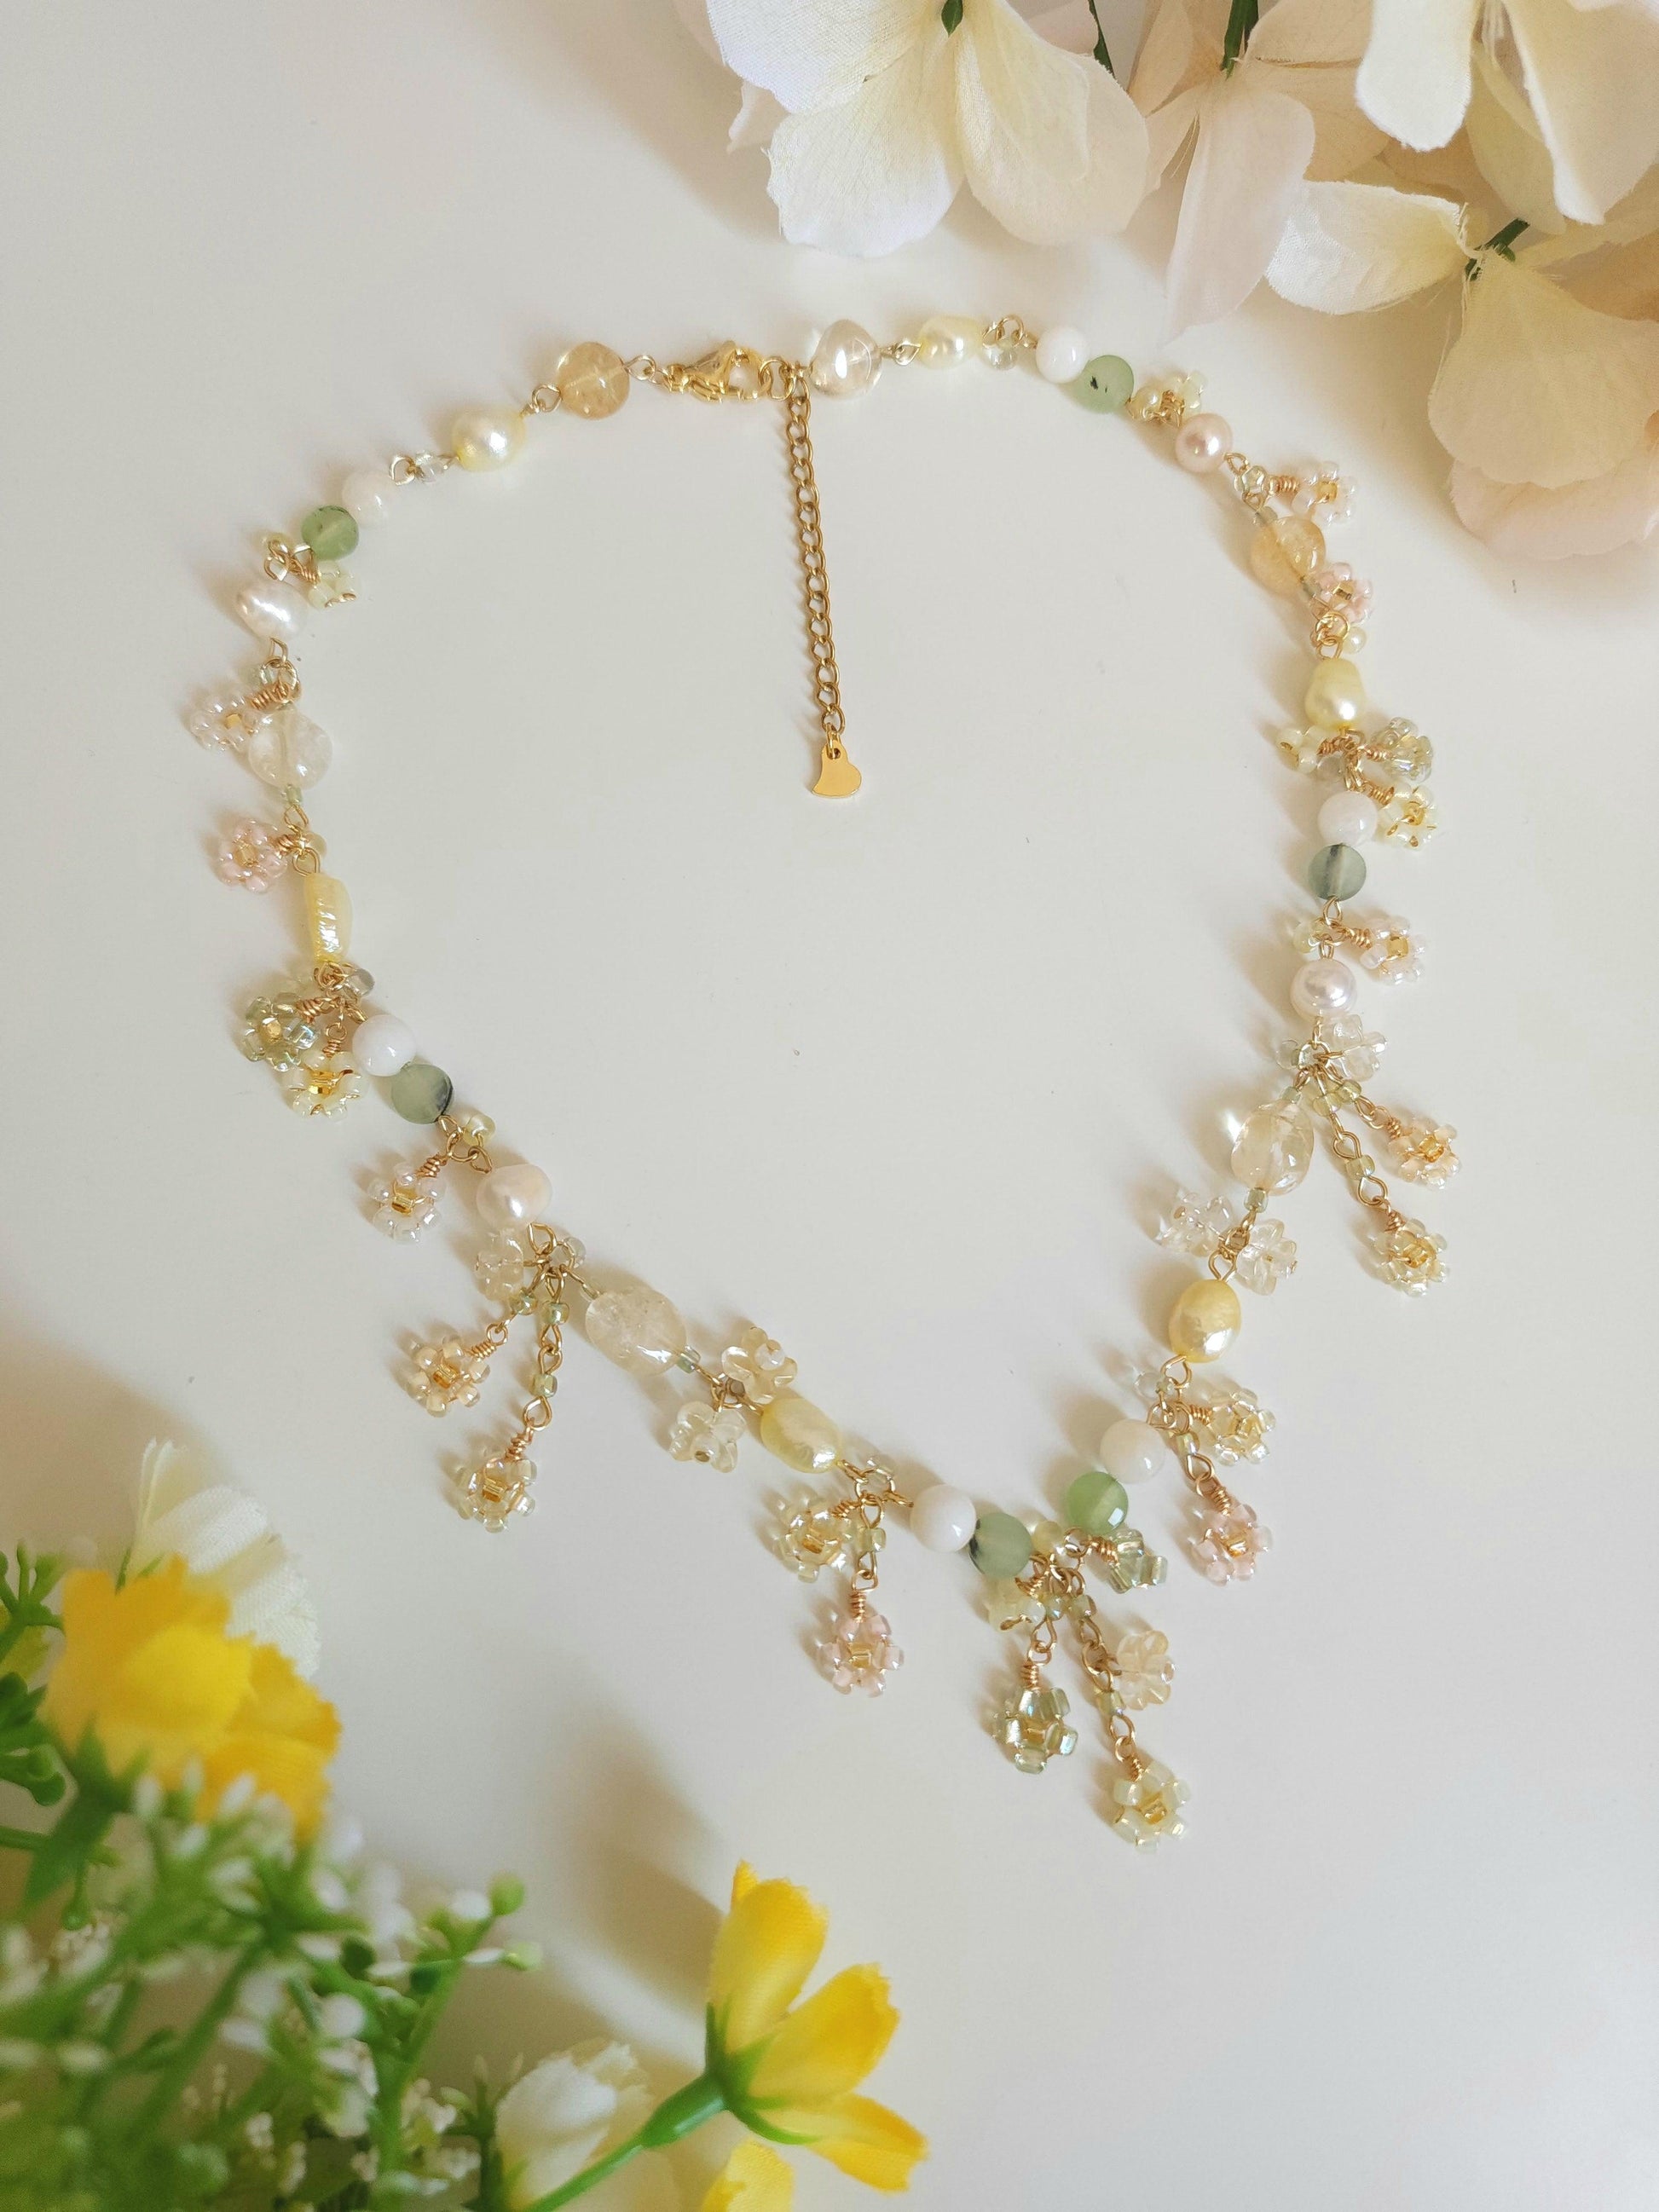 'Picnic in a Flower Field' Floral Bouquet Necklace - By Cocoyu